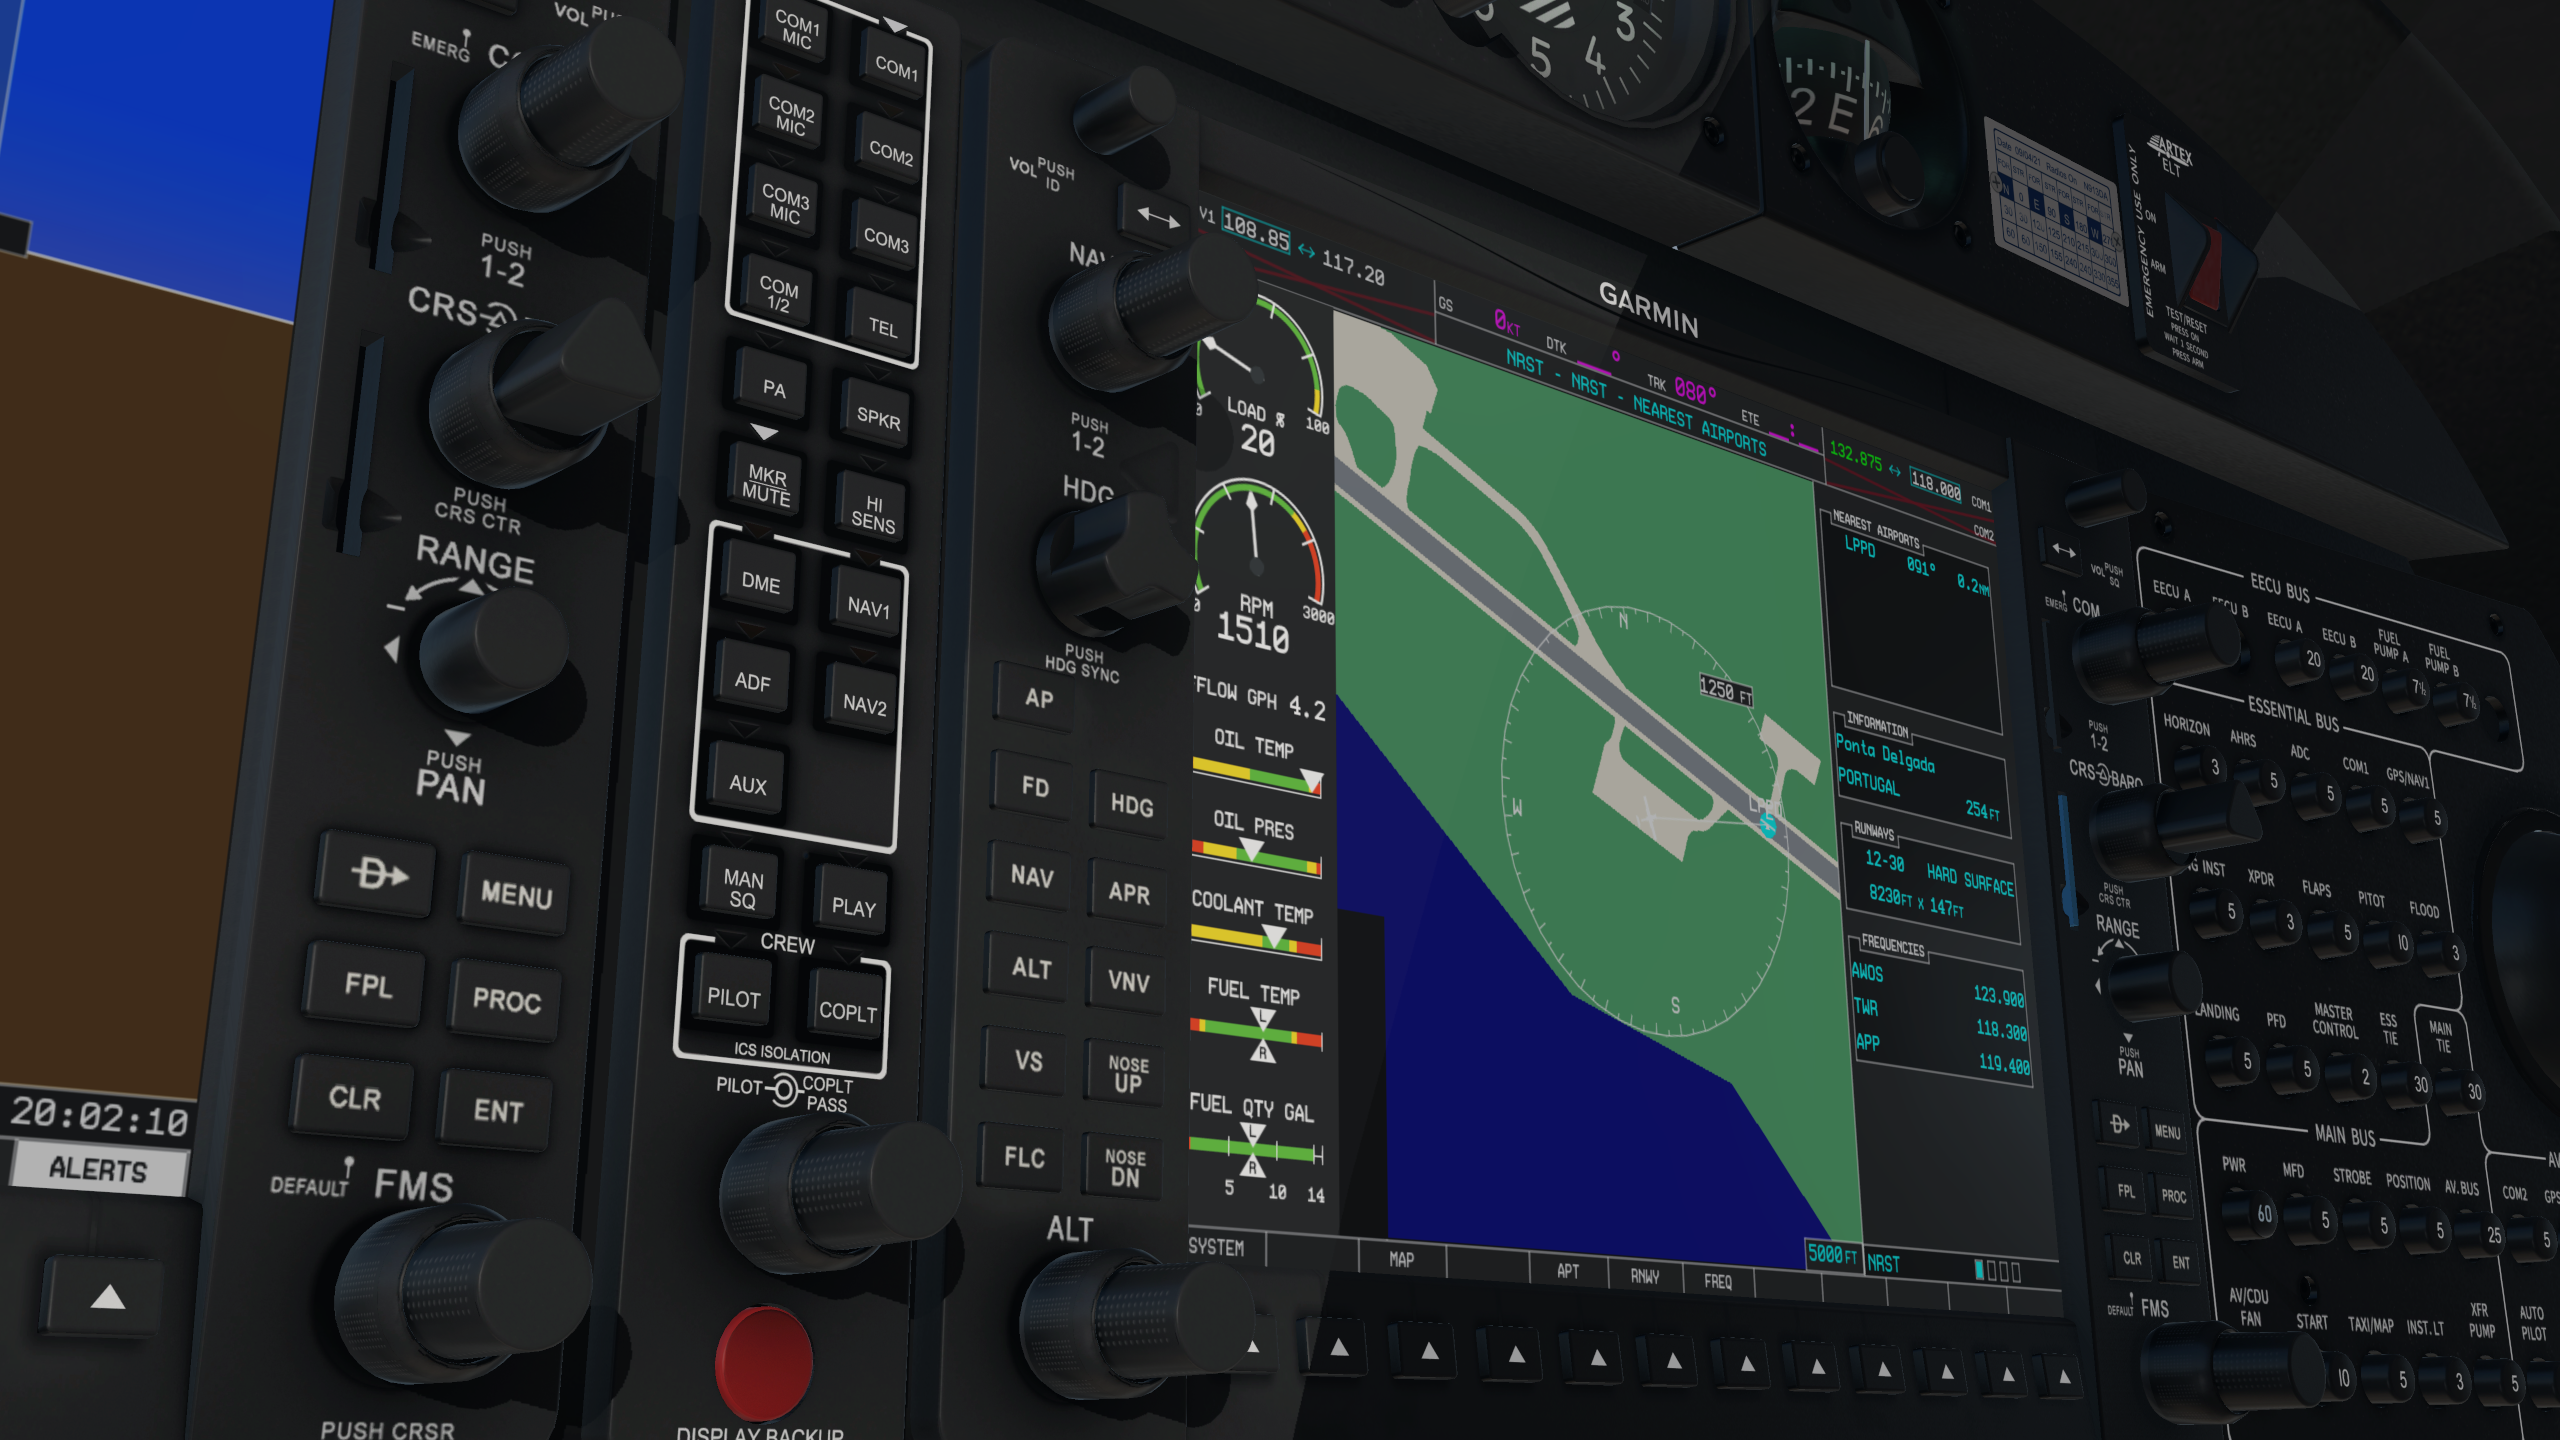 SimSolutions Releases DA40NG for X-Plane 11 - SimSolutions, X-Plane